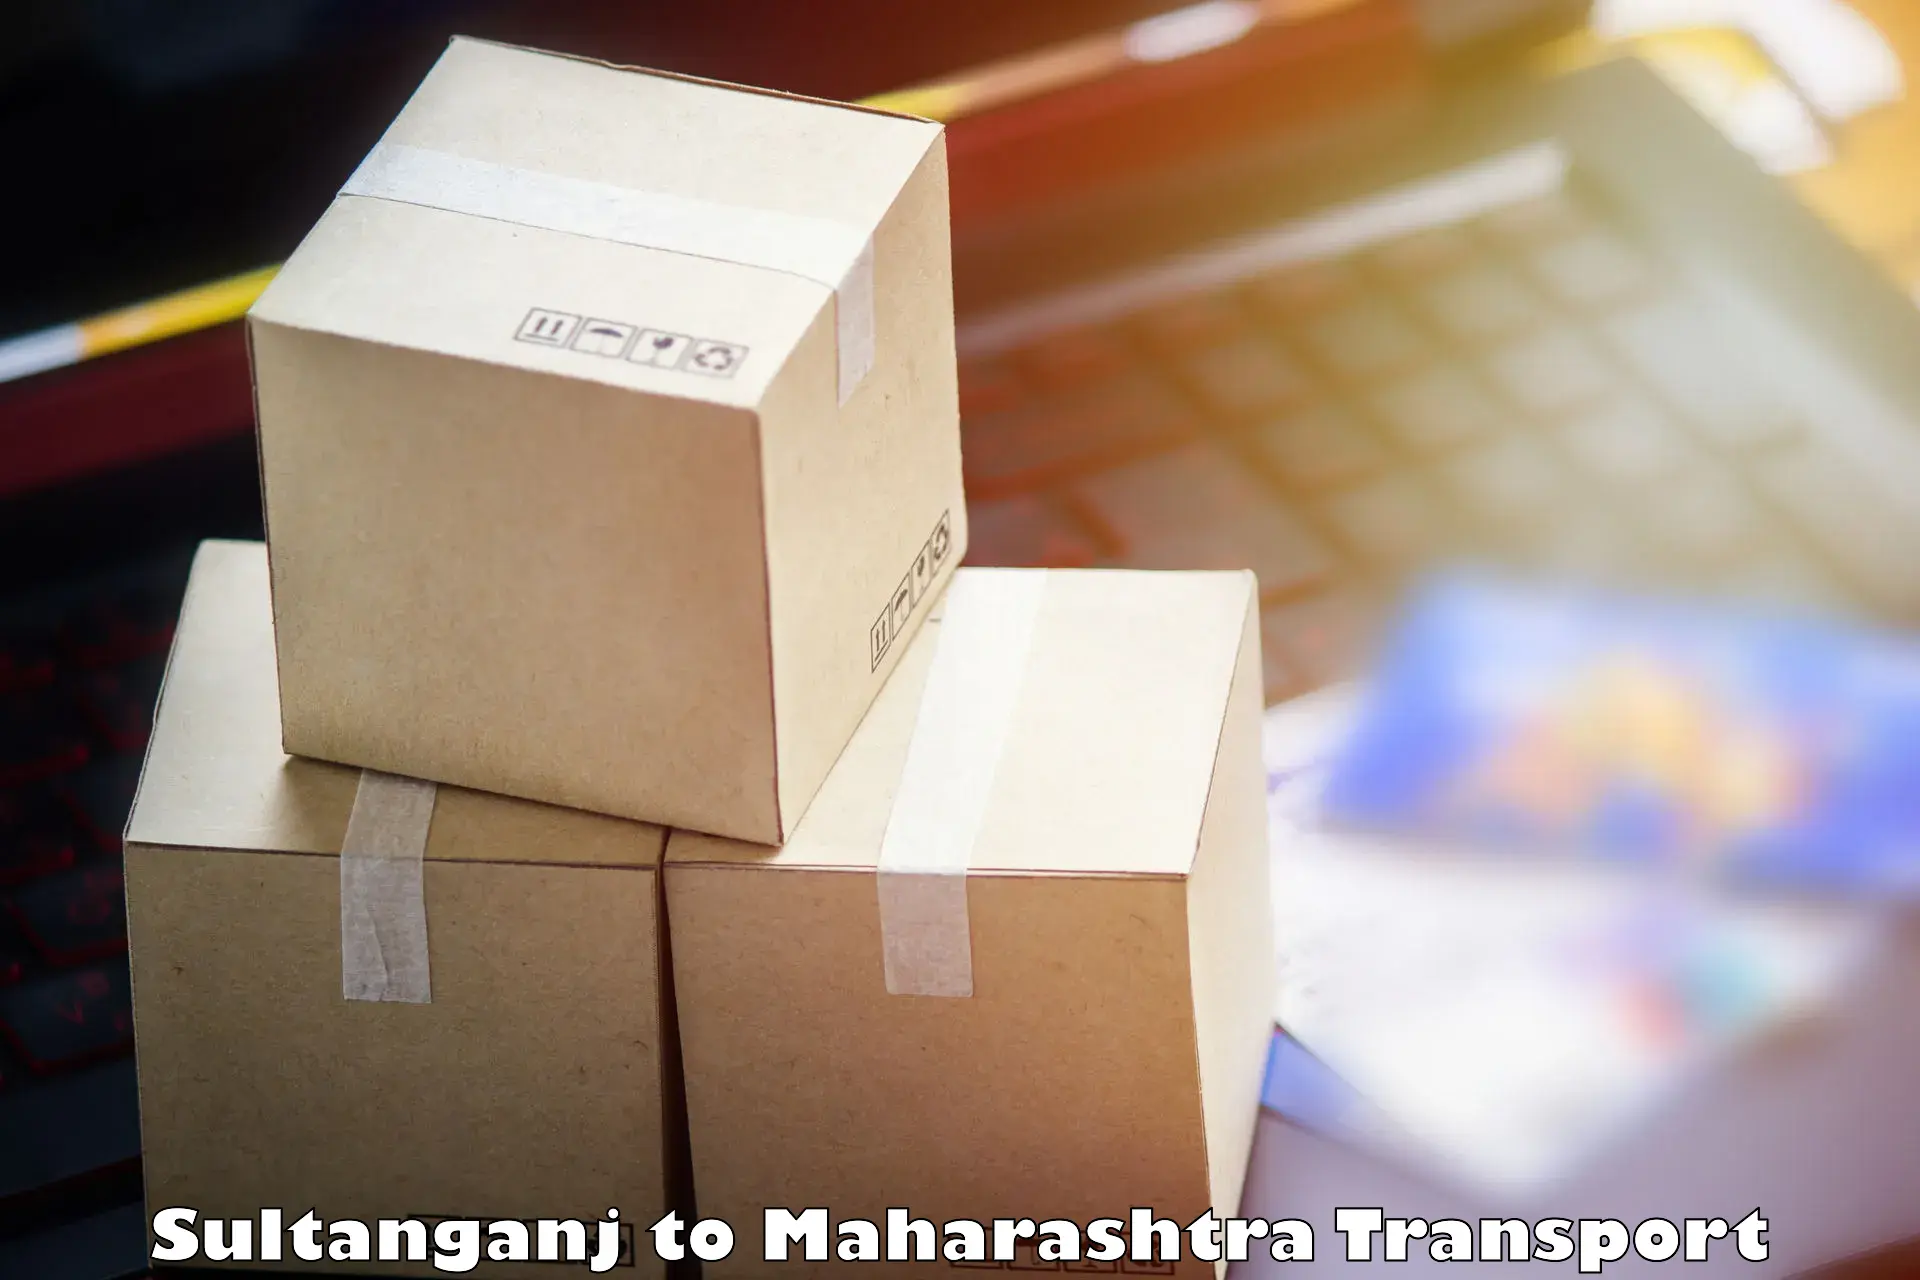 Delivery service Sultanganj to Mahabaleshwar